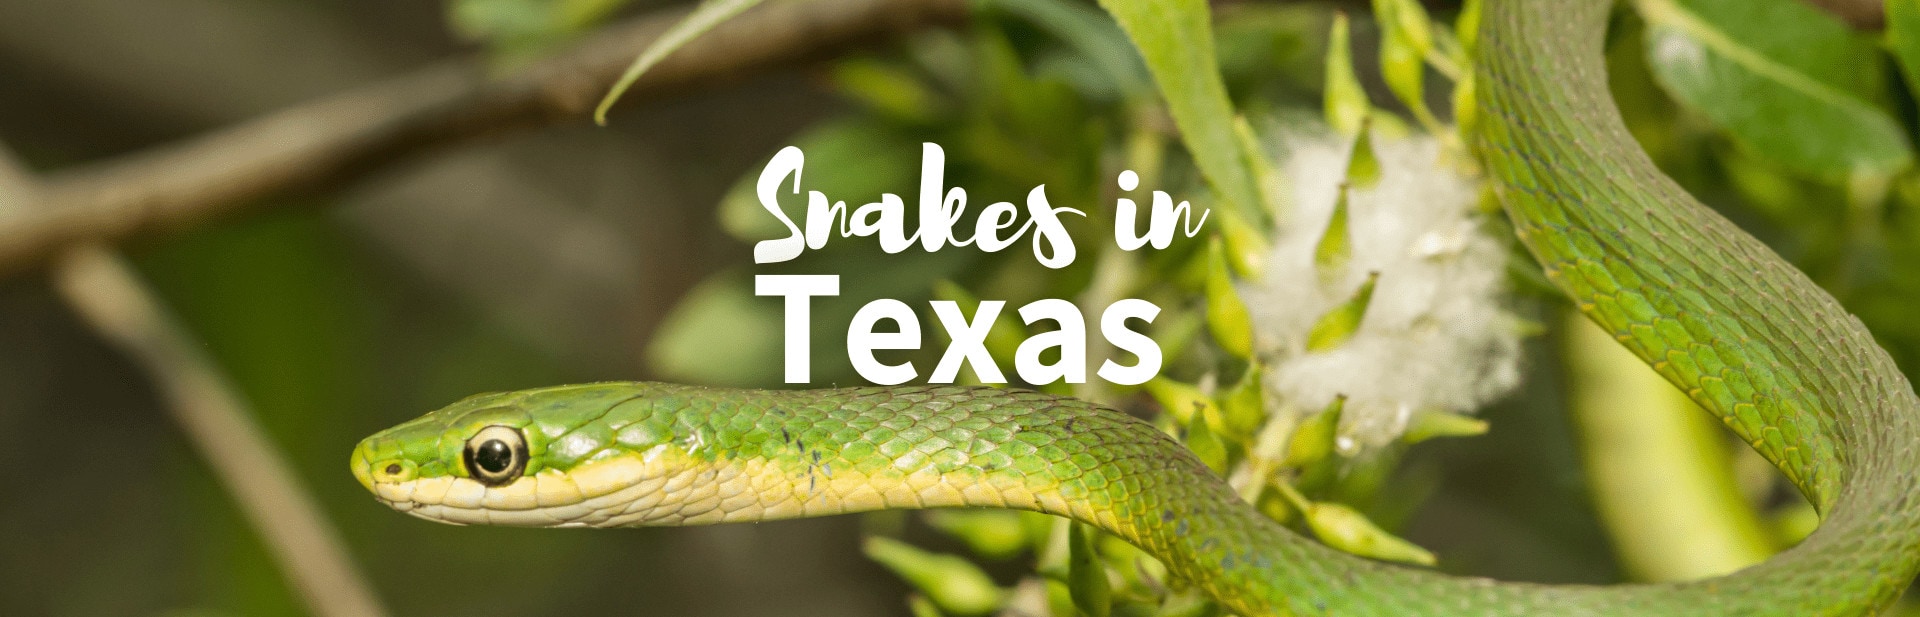 Snakes in Texas: 9 Different Types of Venomous and Nonvenomous Snakes Slithering in Texas